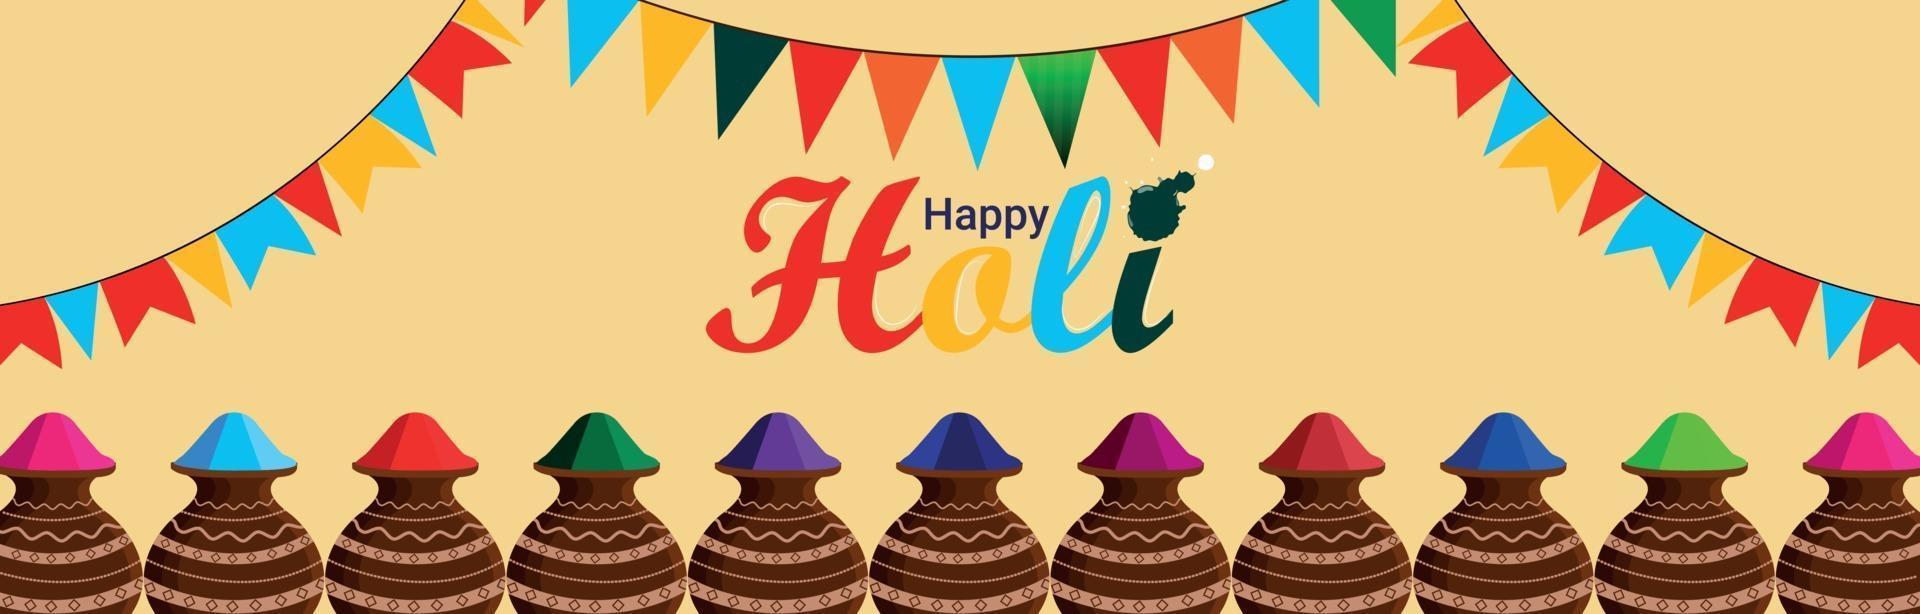 Happy holi celebration banner with colorful background and illustration vector